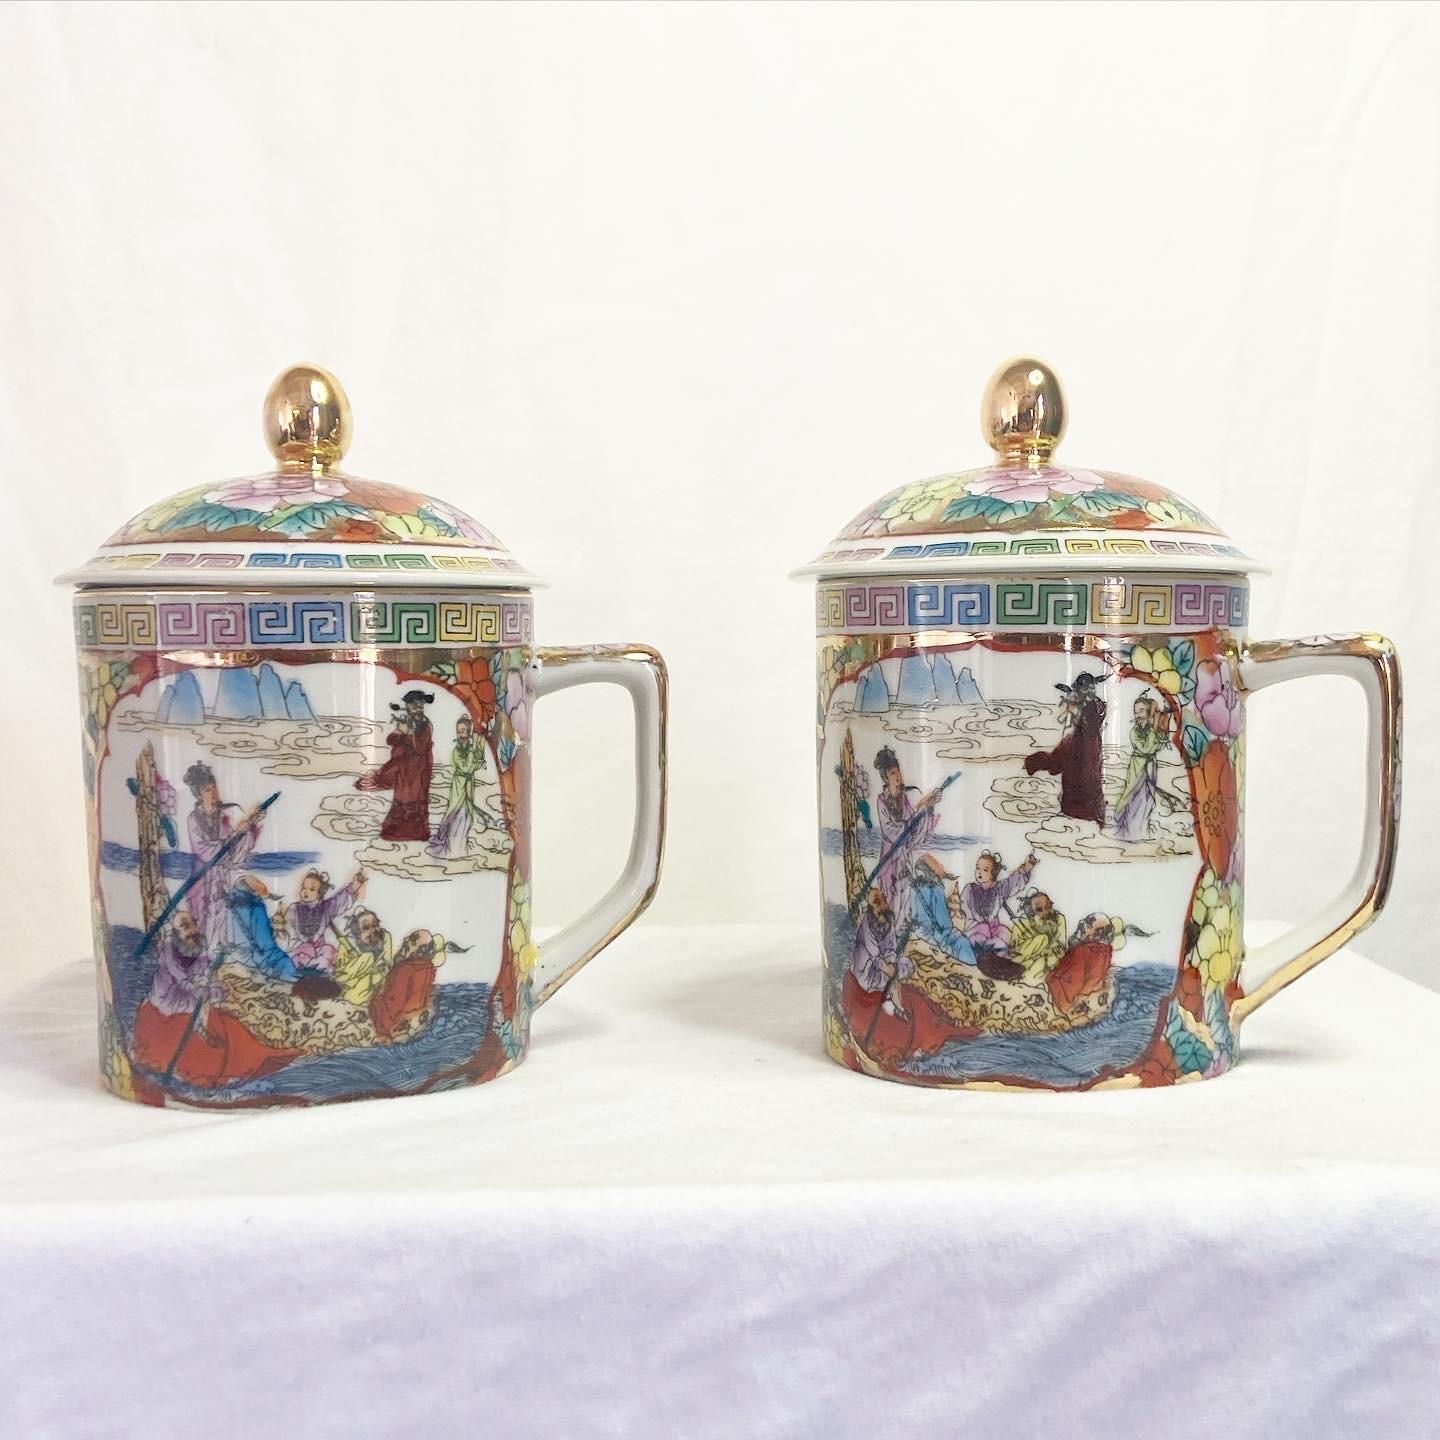 Incredible pair of vintage Chinese tea cups. Each feature a wonderful colorful hand painted depiction of the good ole’ days with a matching lid.